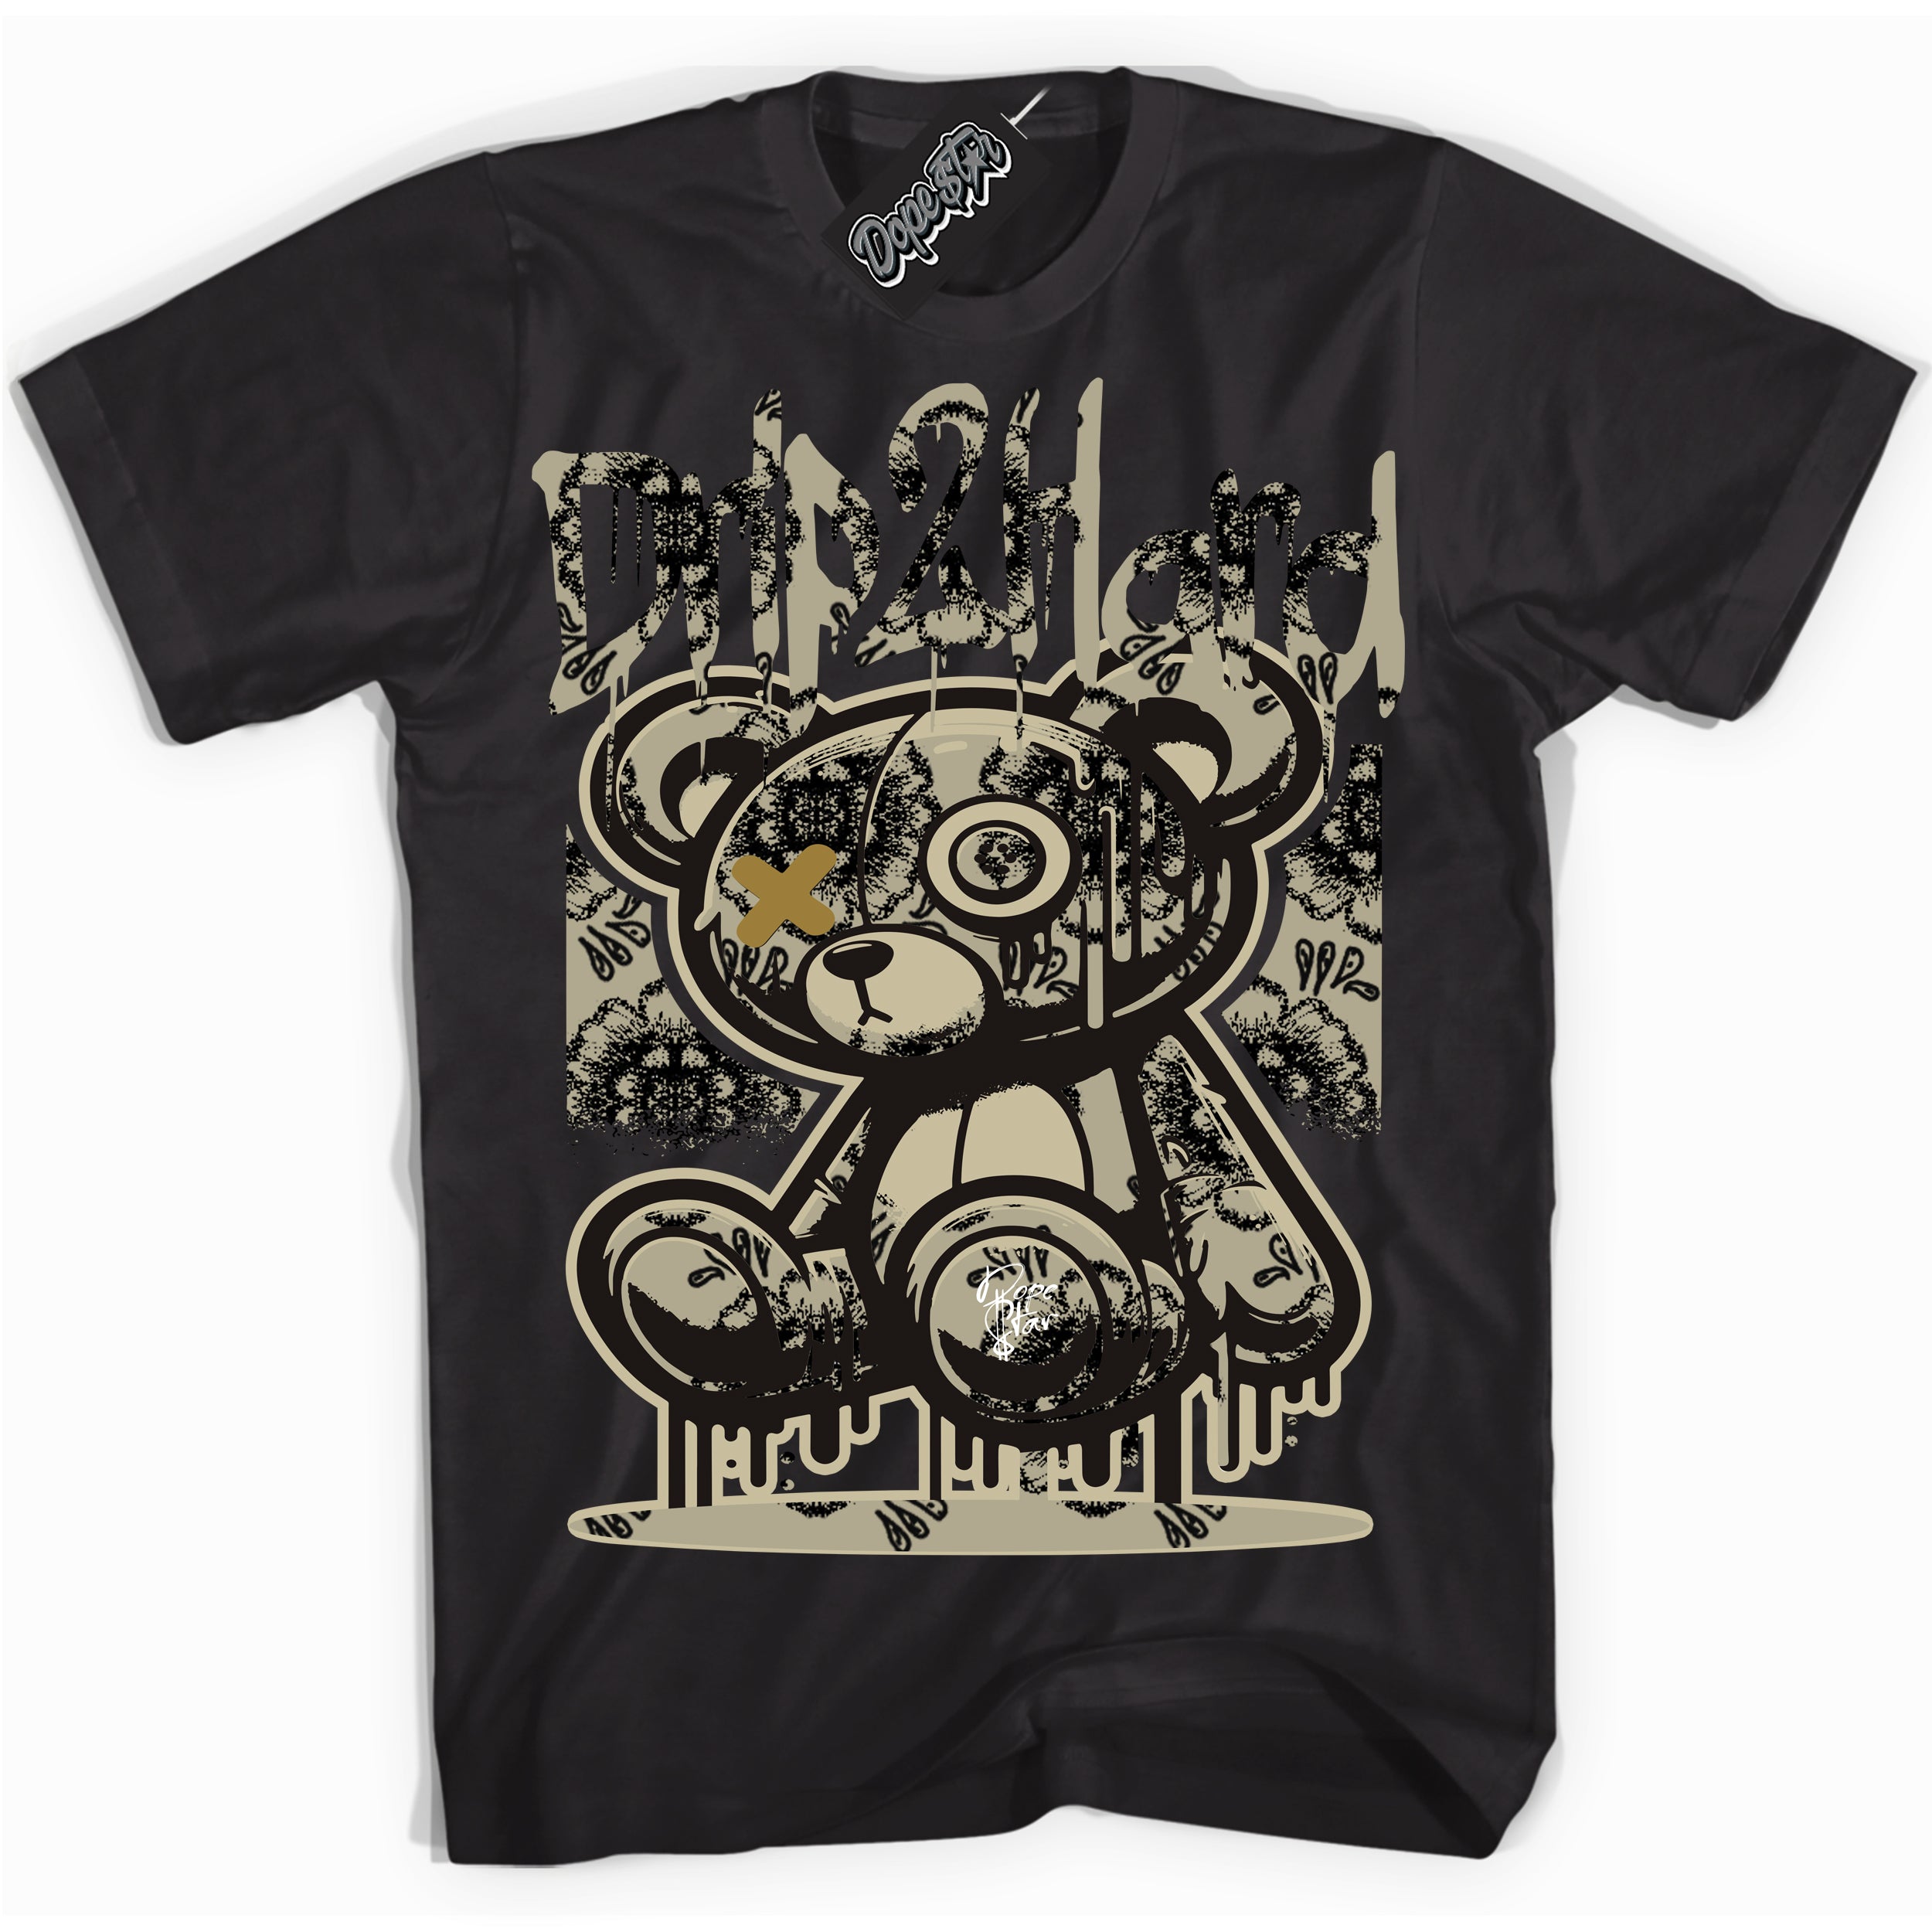 Cool Black graphic tee with “ Drip 2 Hard ” design, that perfectly matches Día de Muertos 1s 